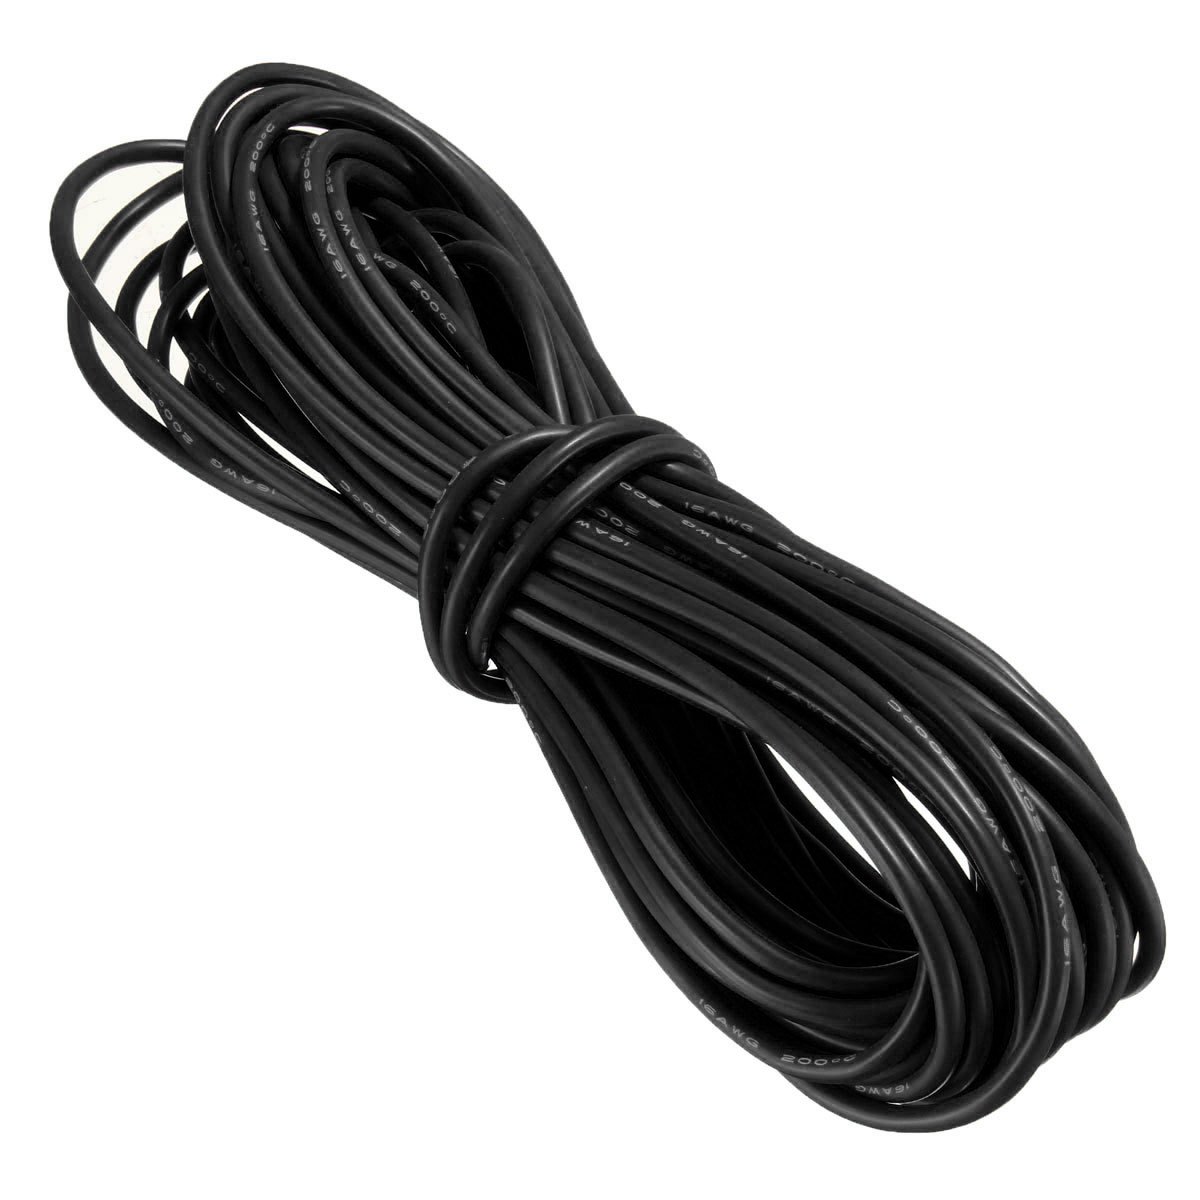 High Quality 16AWG Silicon Wire 10m (Black)